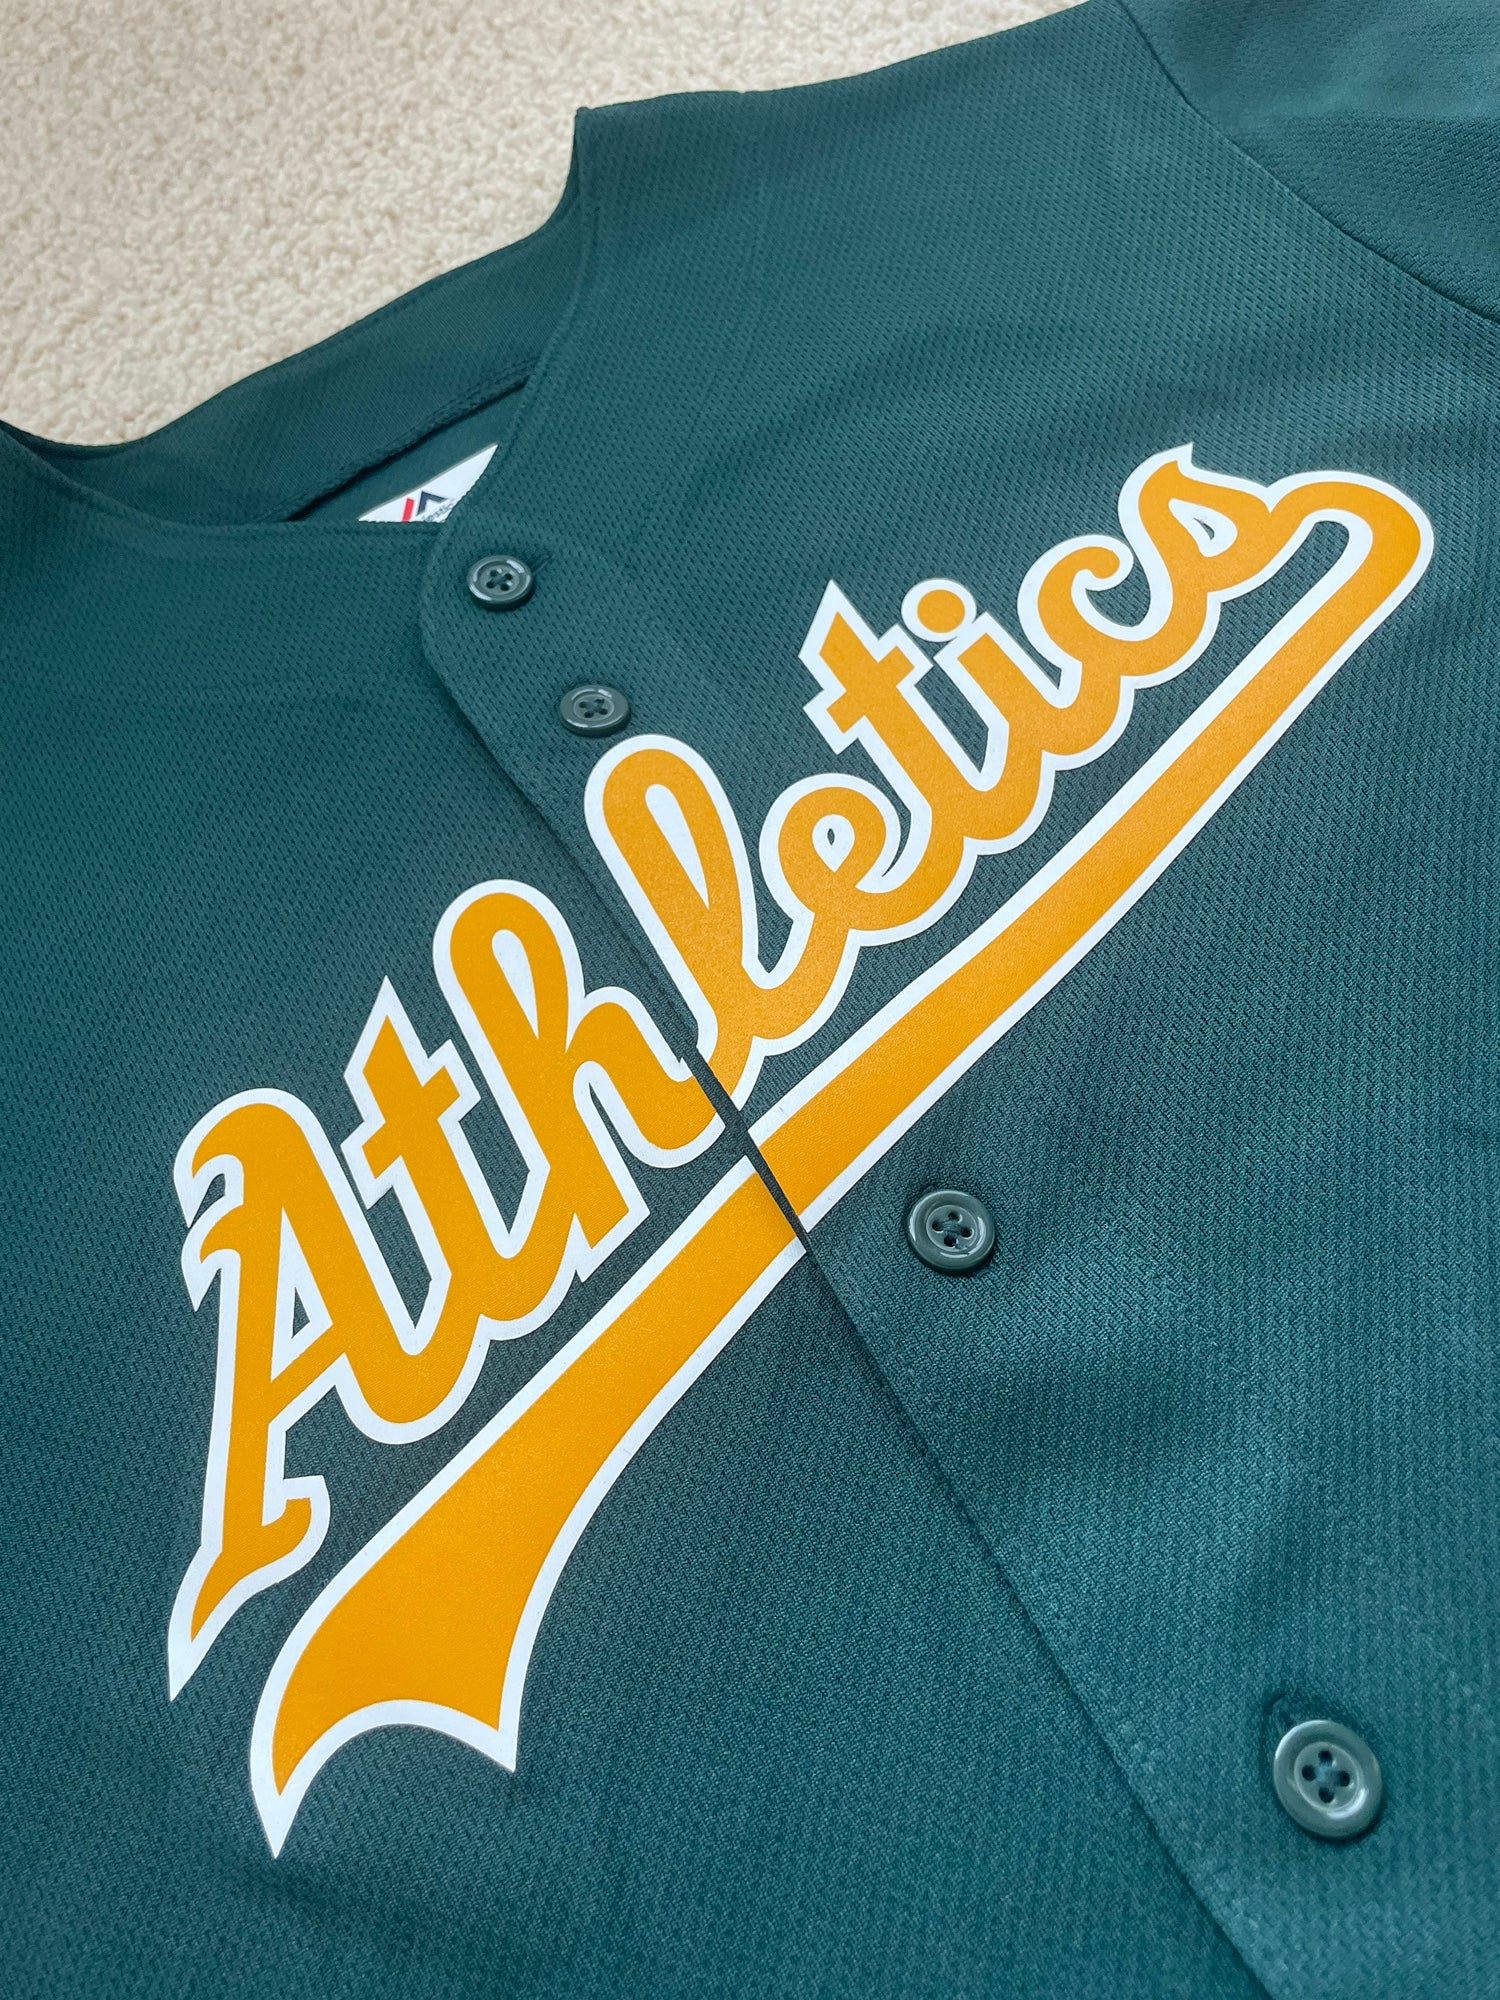 Majestic Cool Base Oakland Athletics Youth Jersey-Medium for Sale